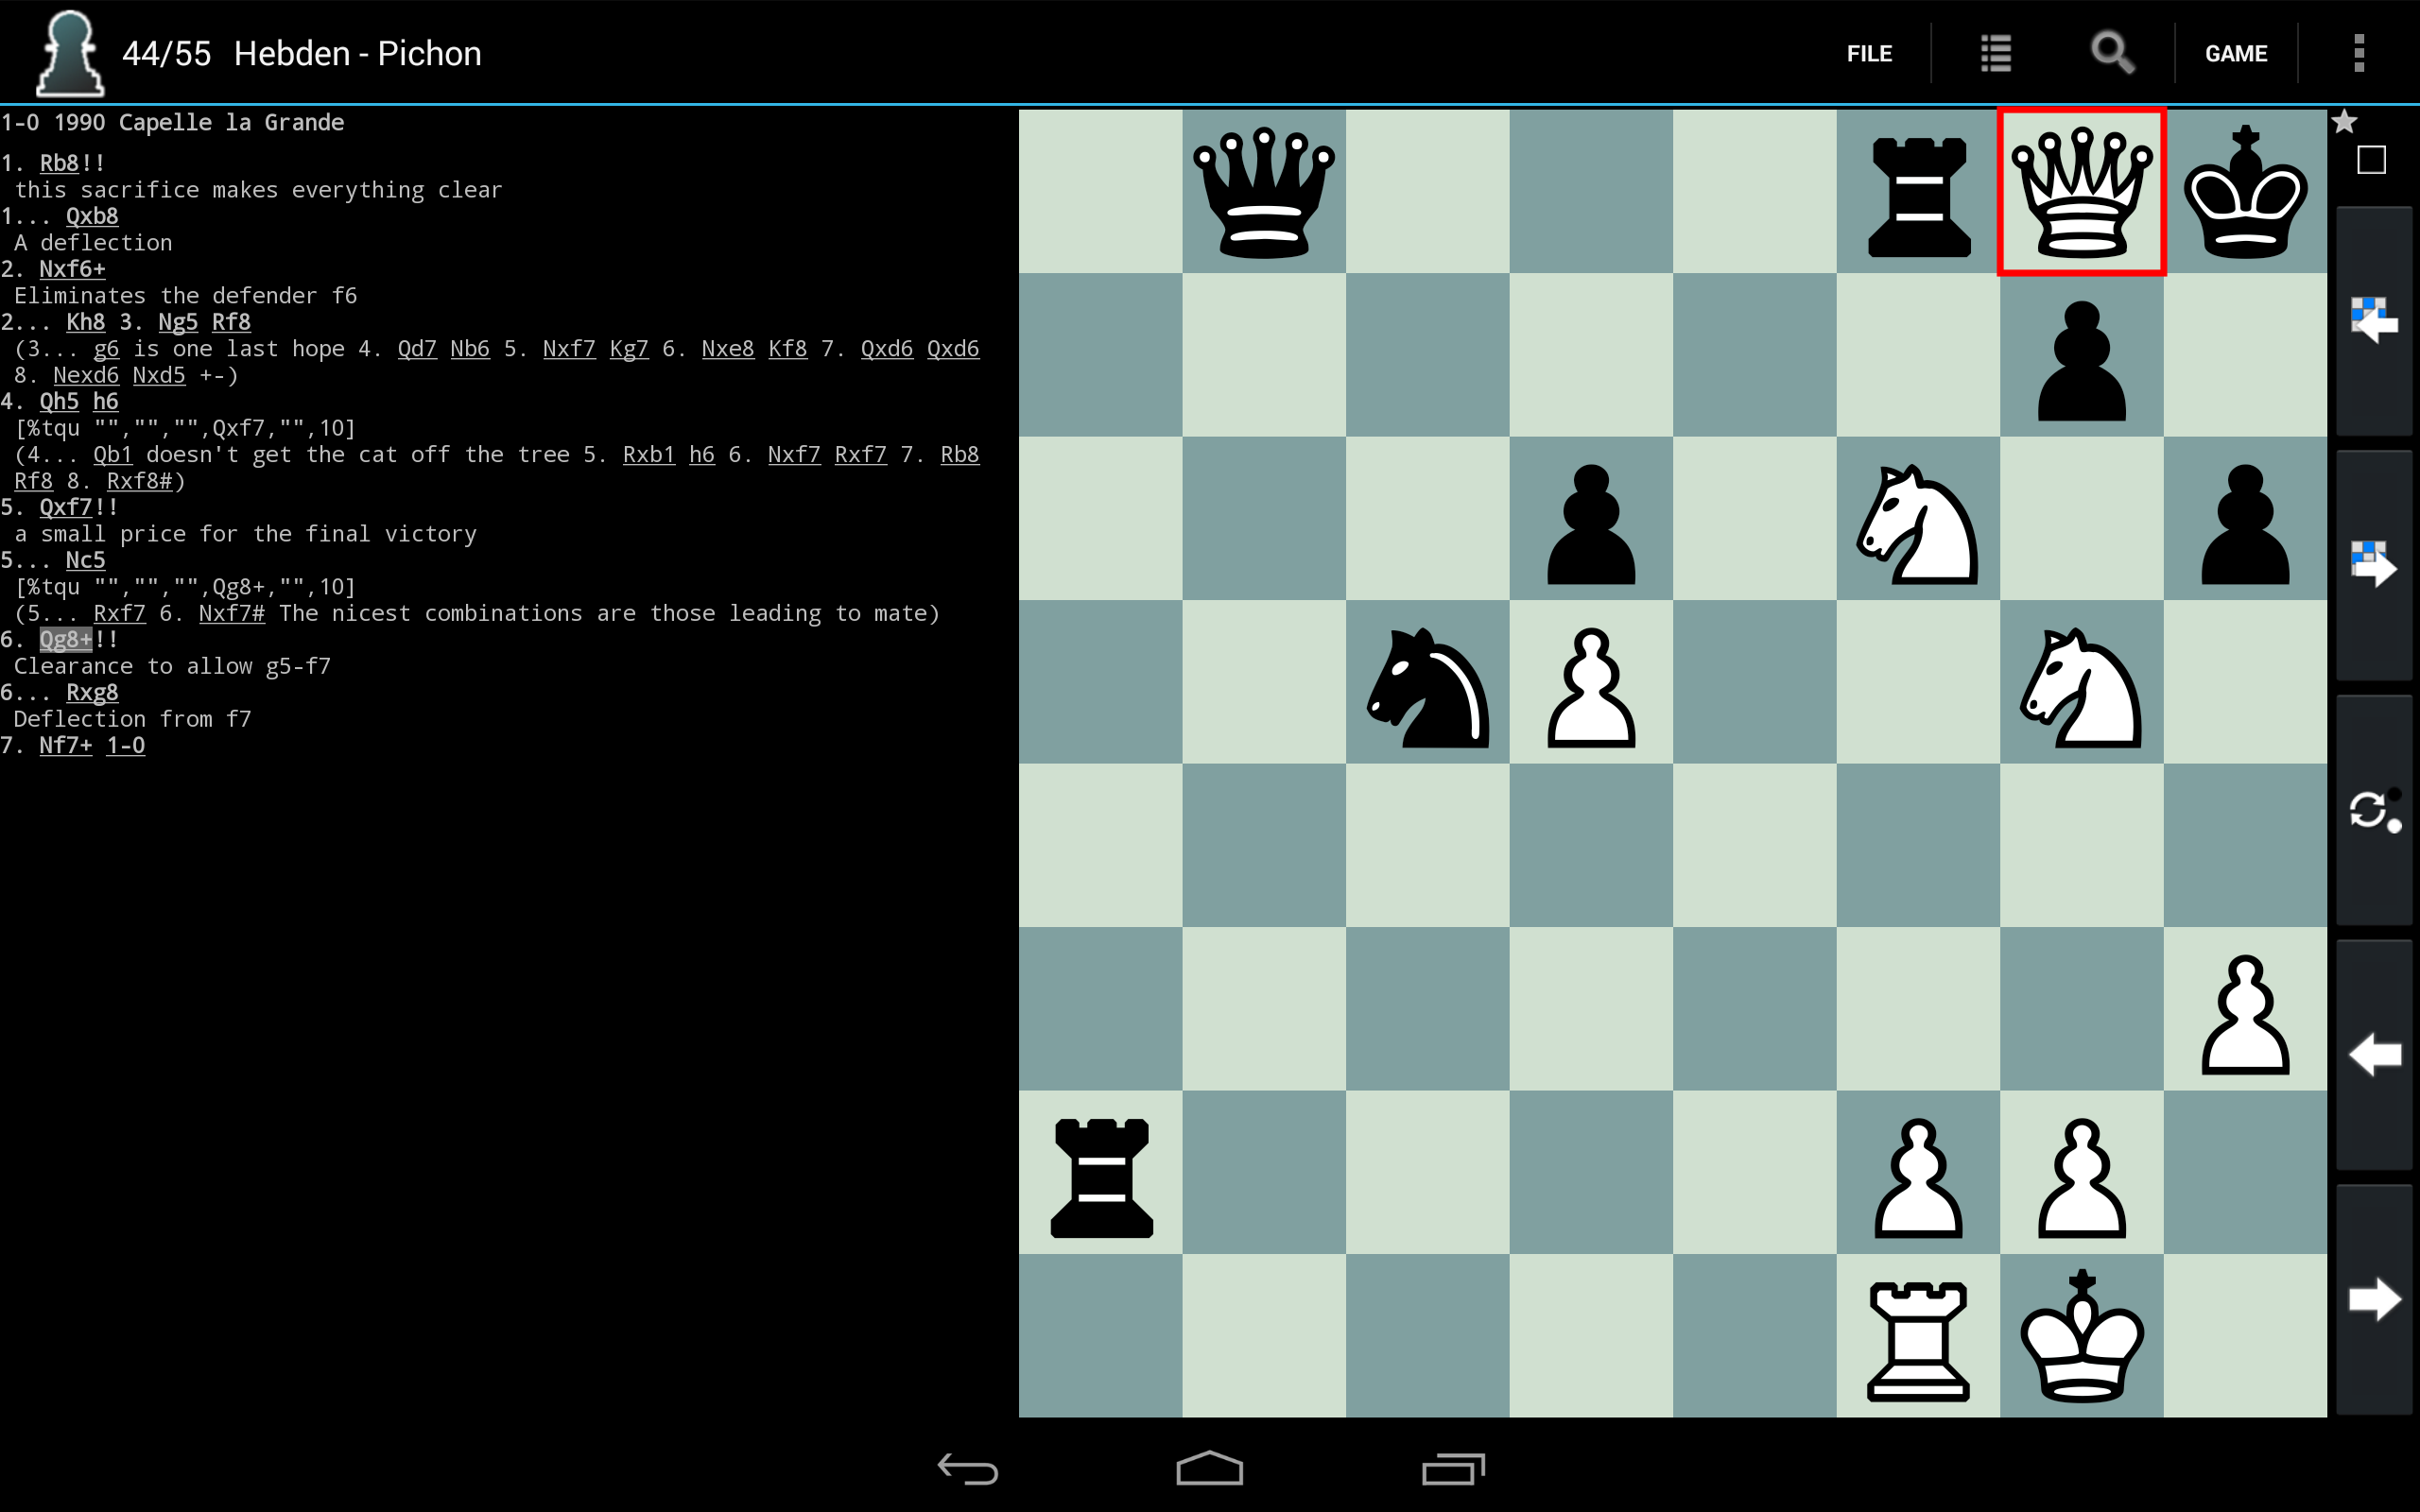 10 best chess games for Android - Android Authority